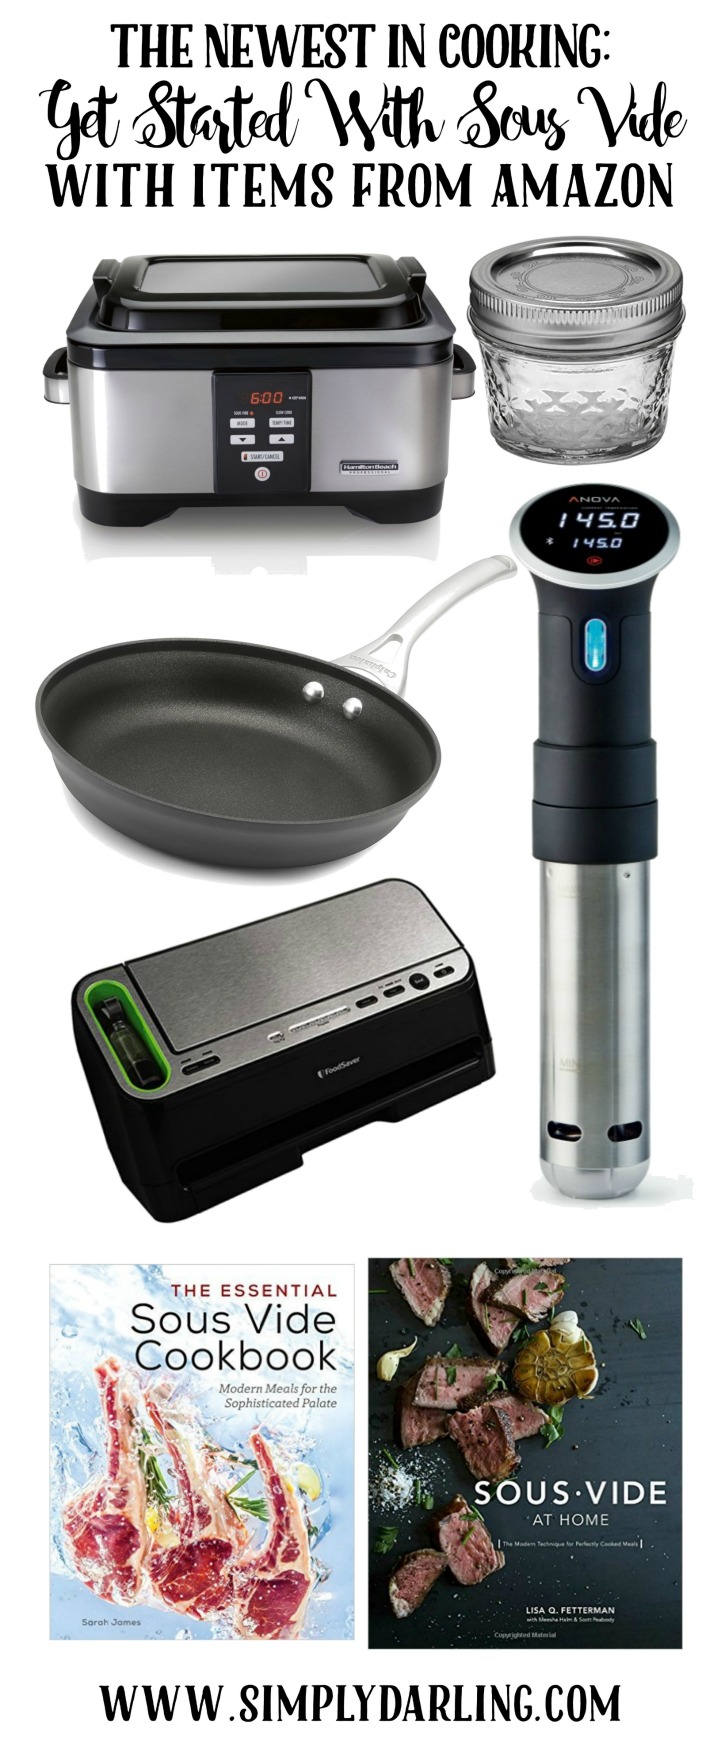 Get Started With Sous Vide Cooking With Products On Amazon